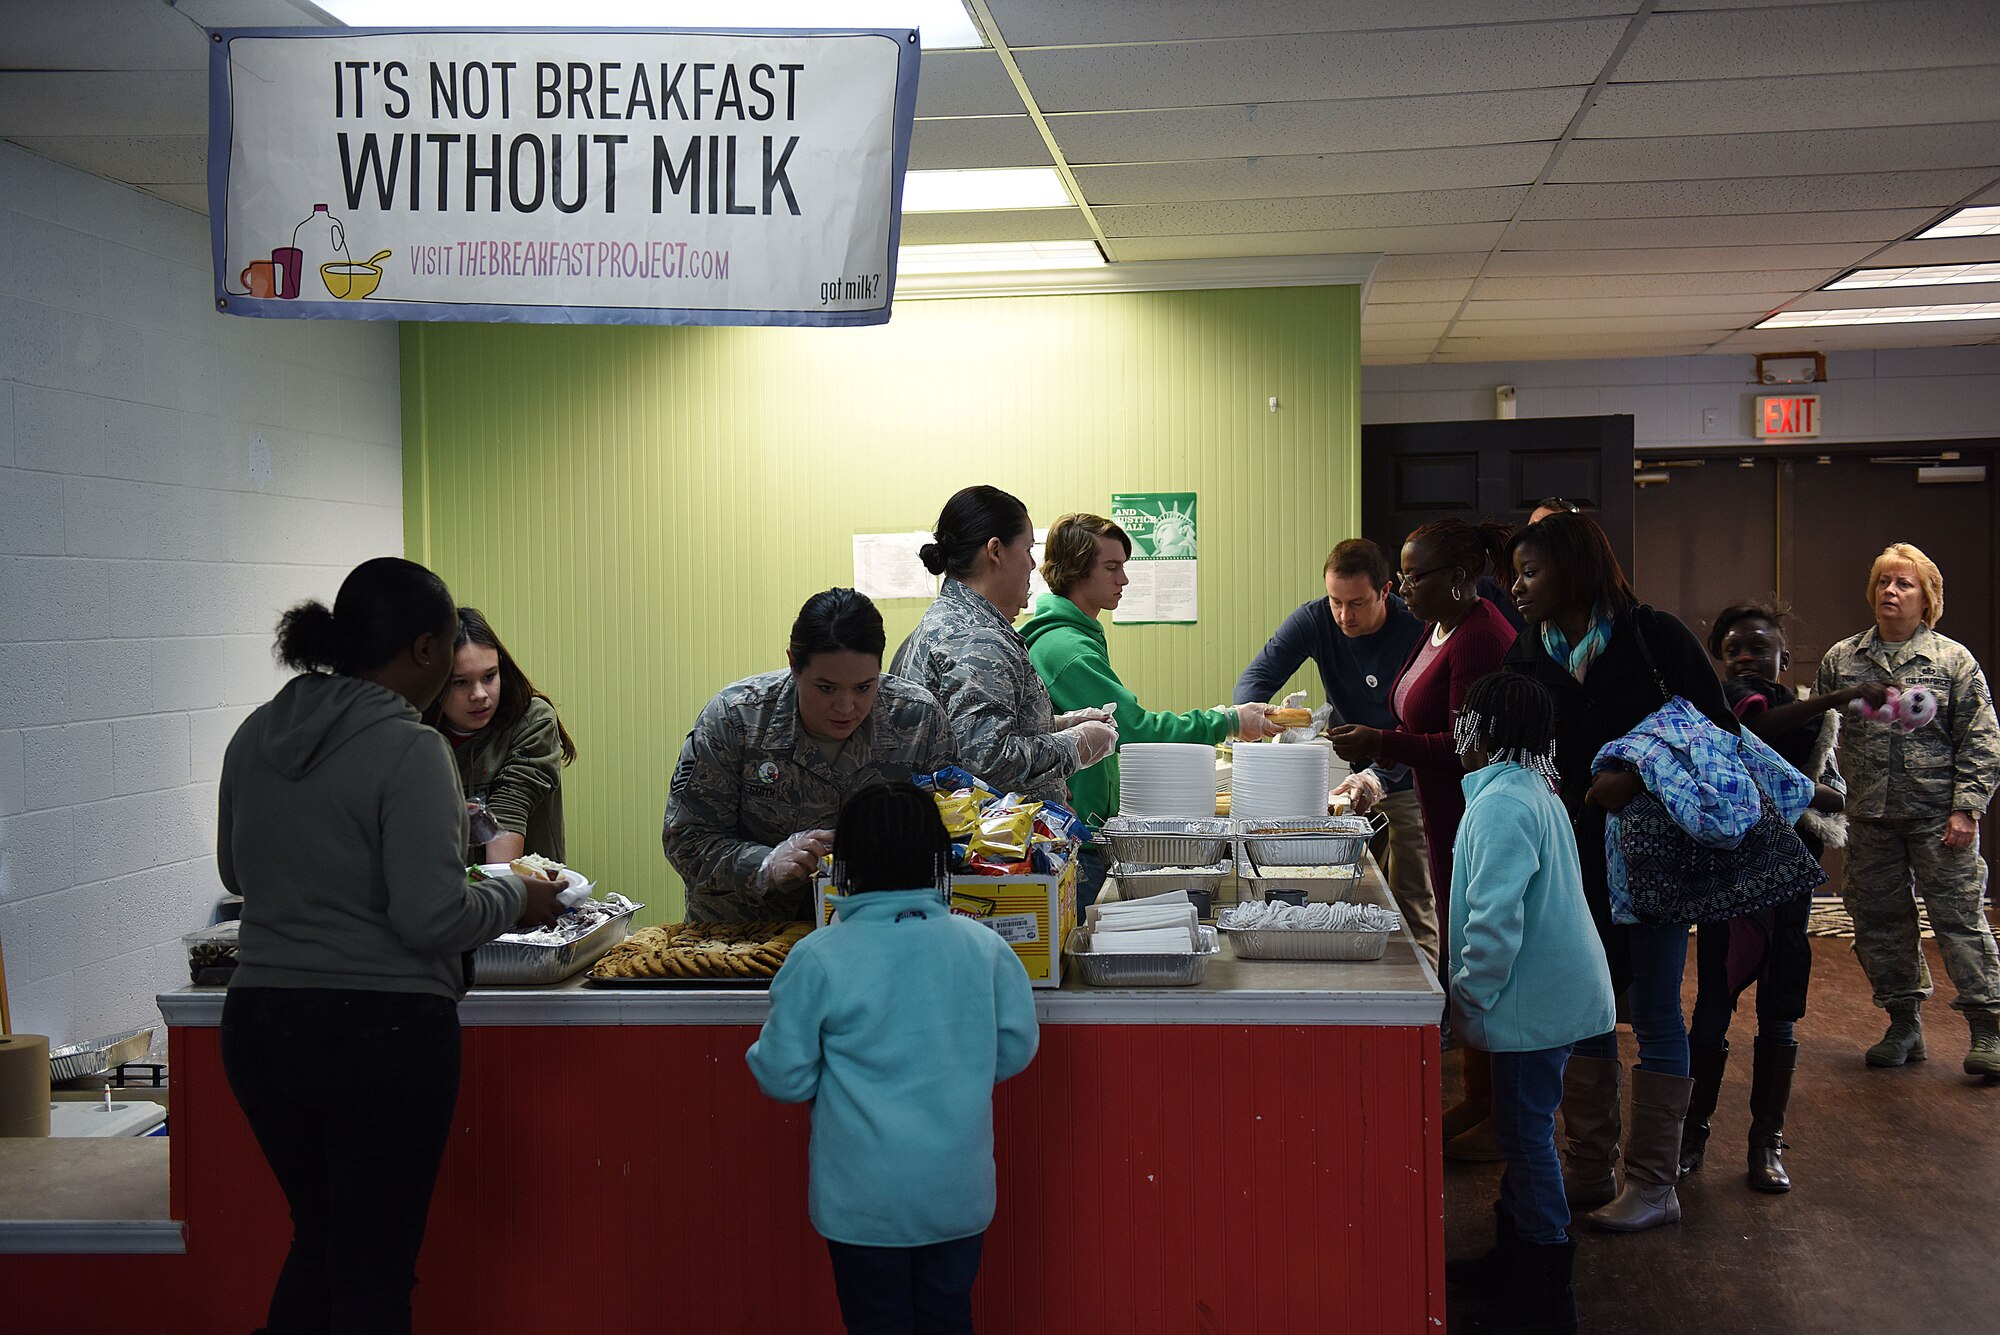 Members of the North Carolina Air National Guard (NCANG) serve food and drinks to families during Operation Santa at the Aristotle Preparatory Academy, Dec. 16, 2017. Operation Santa is a local and annual event run by the Chapter 7 organization of the North Carolina Air National Guard. This year, the NCANG provided presents, lunch, music, face-painting, blankets, stuffed animals. They partnered with the local Target for food donations and a craft table, and inflatable castles through Garris and Wilson Entertainment. (U.S. Air National Guard photo by Staff. Sgt. Laura J. Montgomery)